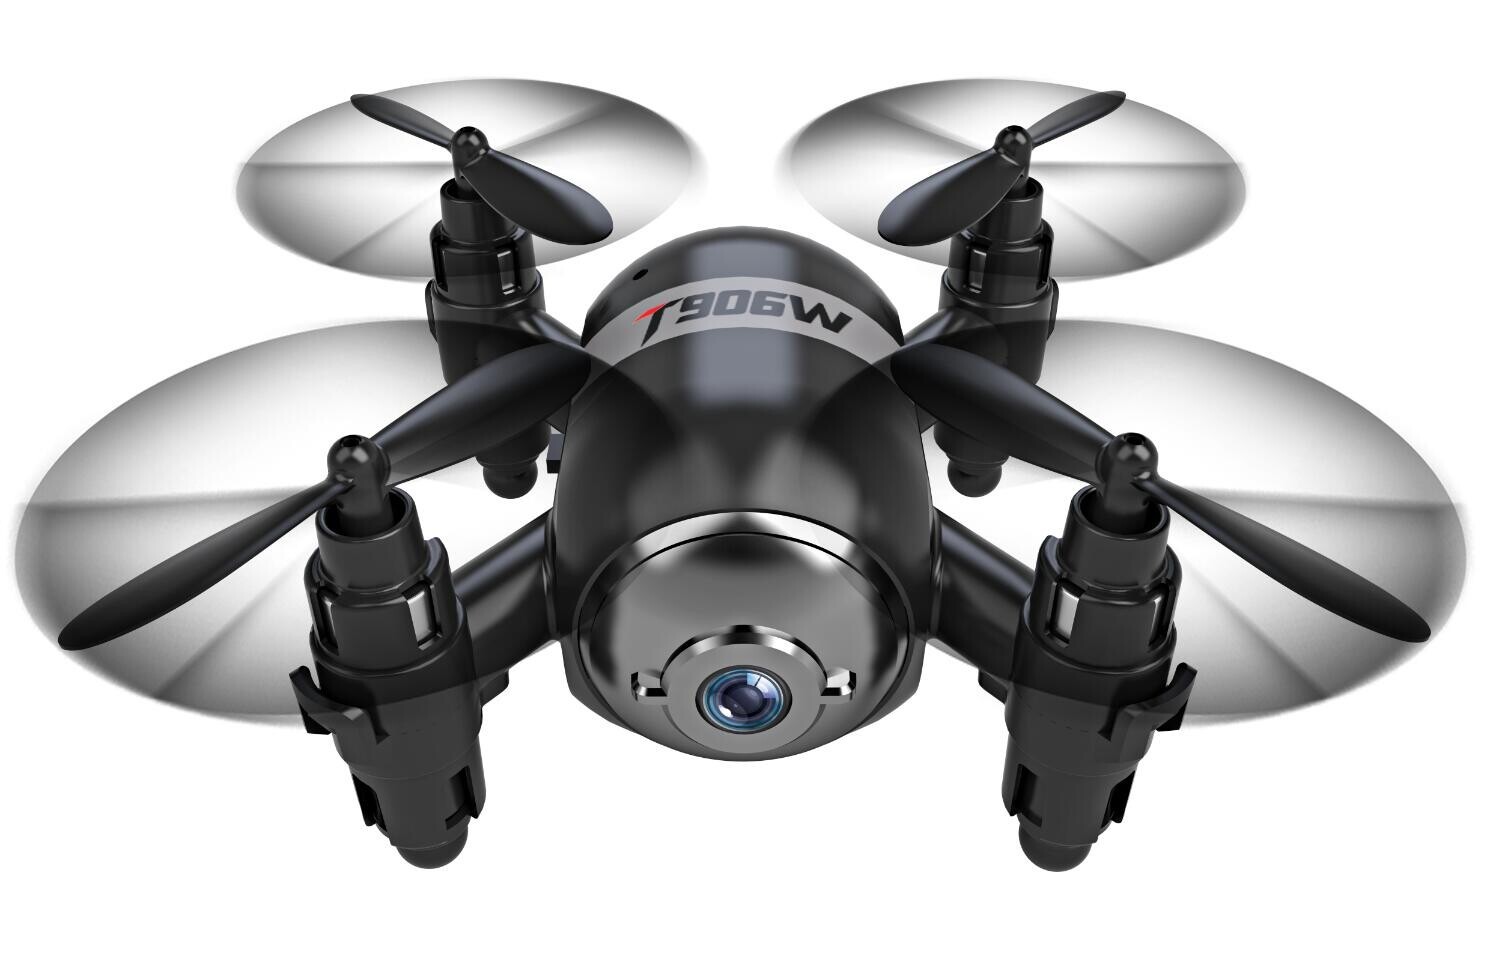 RC Micro Drone with Wi-Fi FPV Camera GTeng T906W | eBay